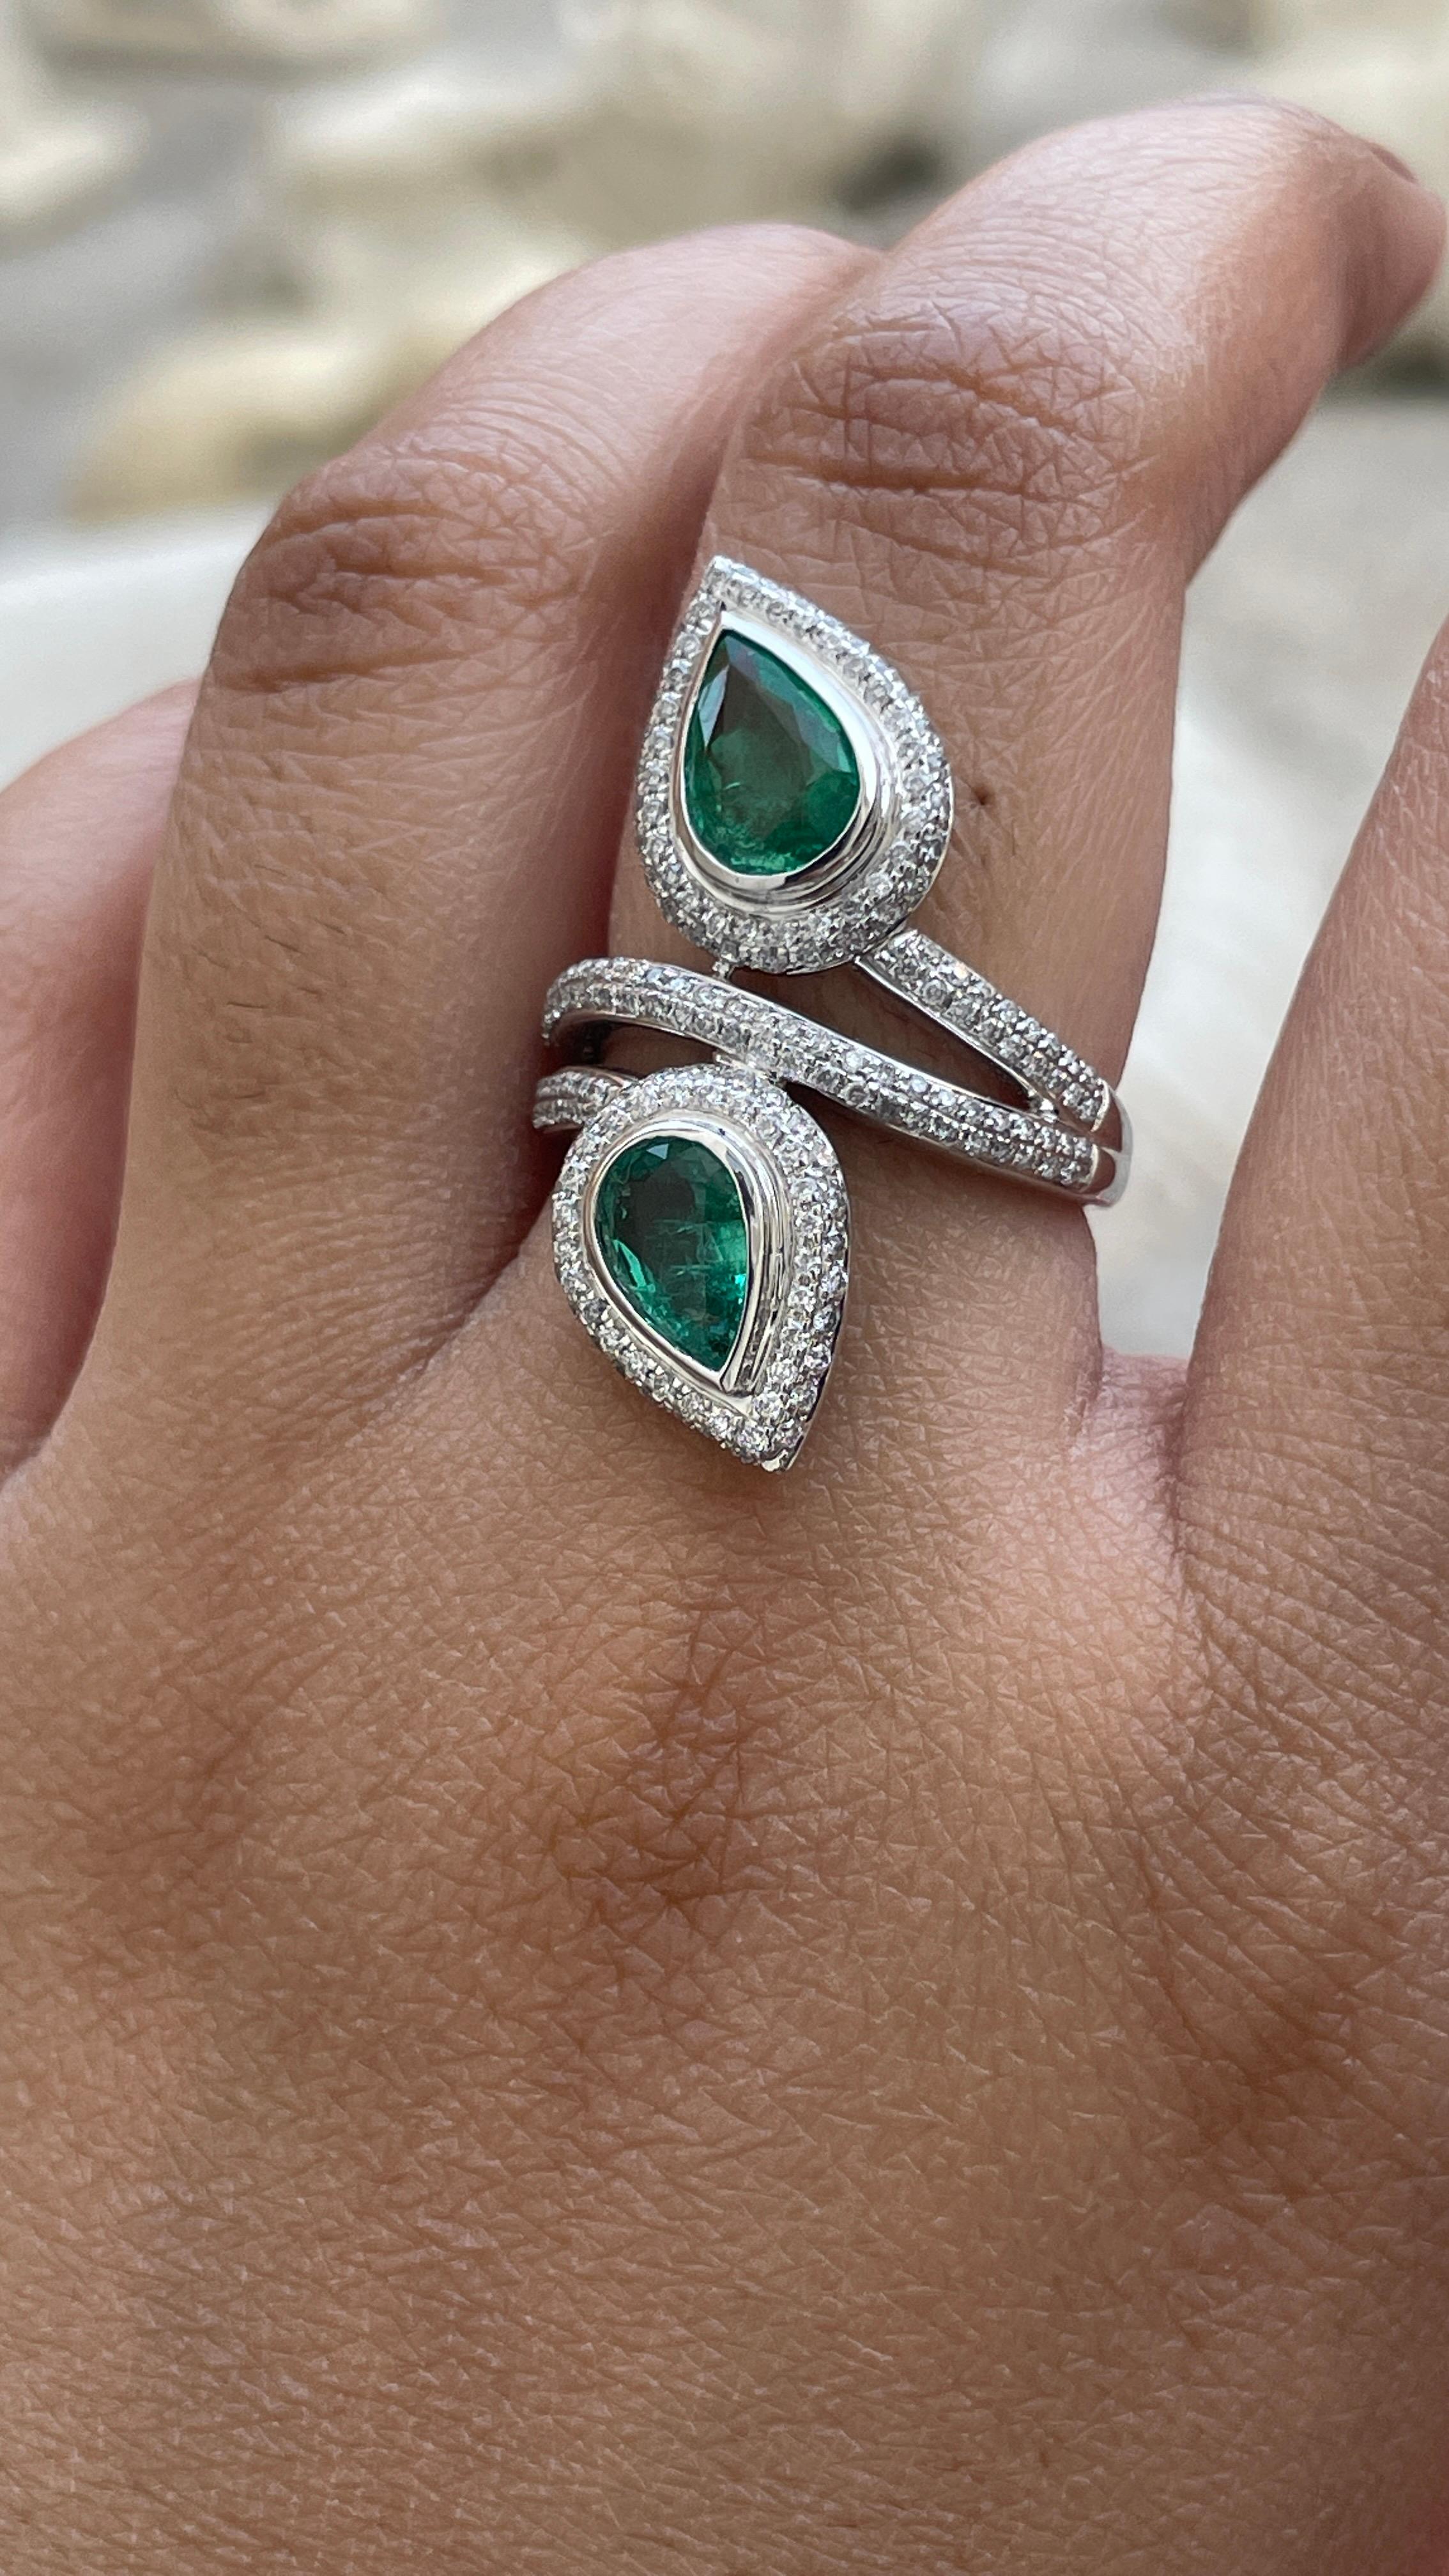 For Sale:  Pear Cut Emerald Cocktail Ring with Diamonds in 14K Solid White Gold 7